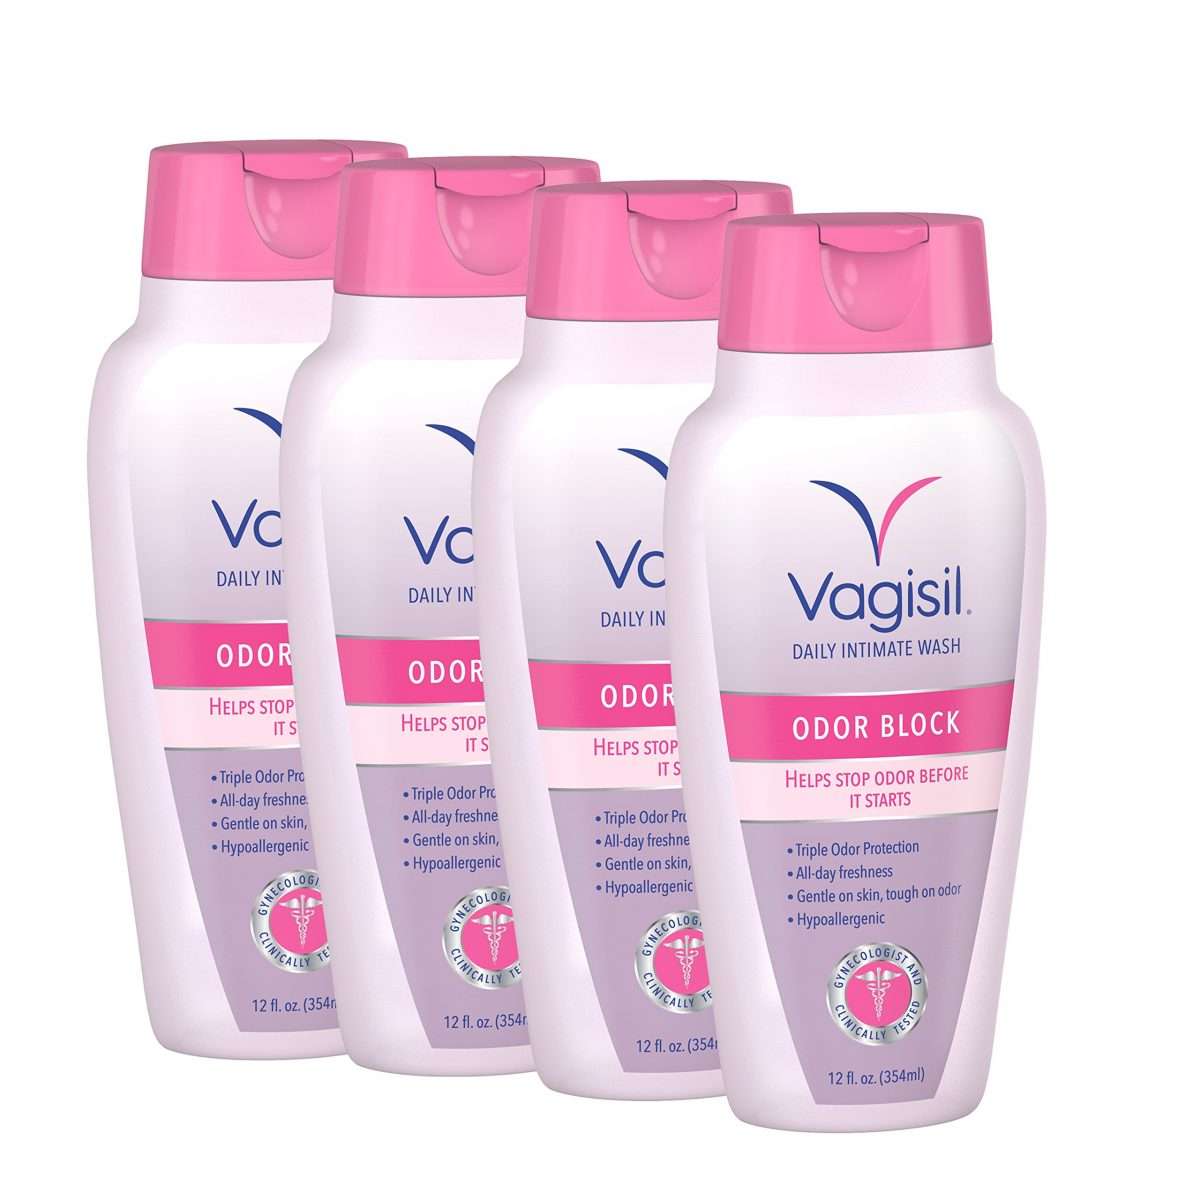 Vagisil Odor Block Cause Yeast Infection